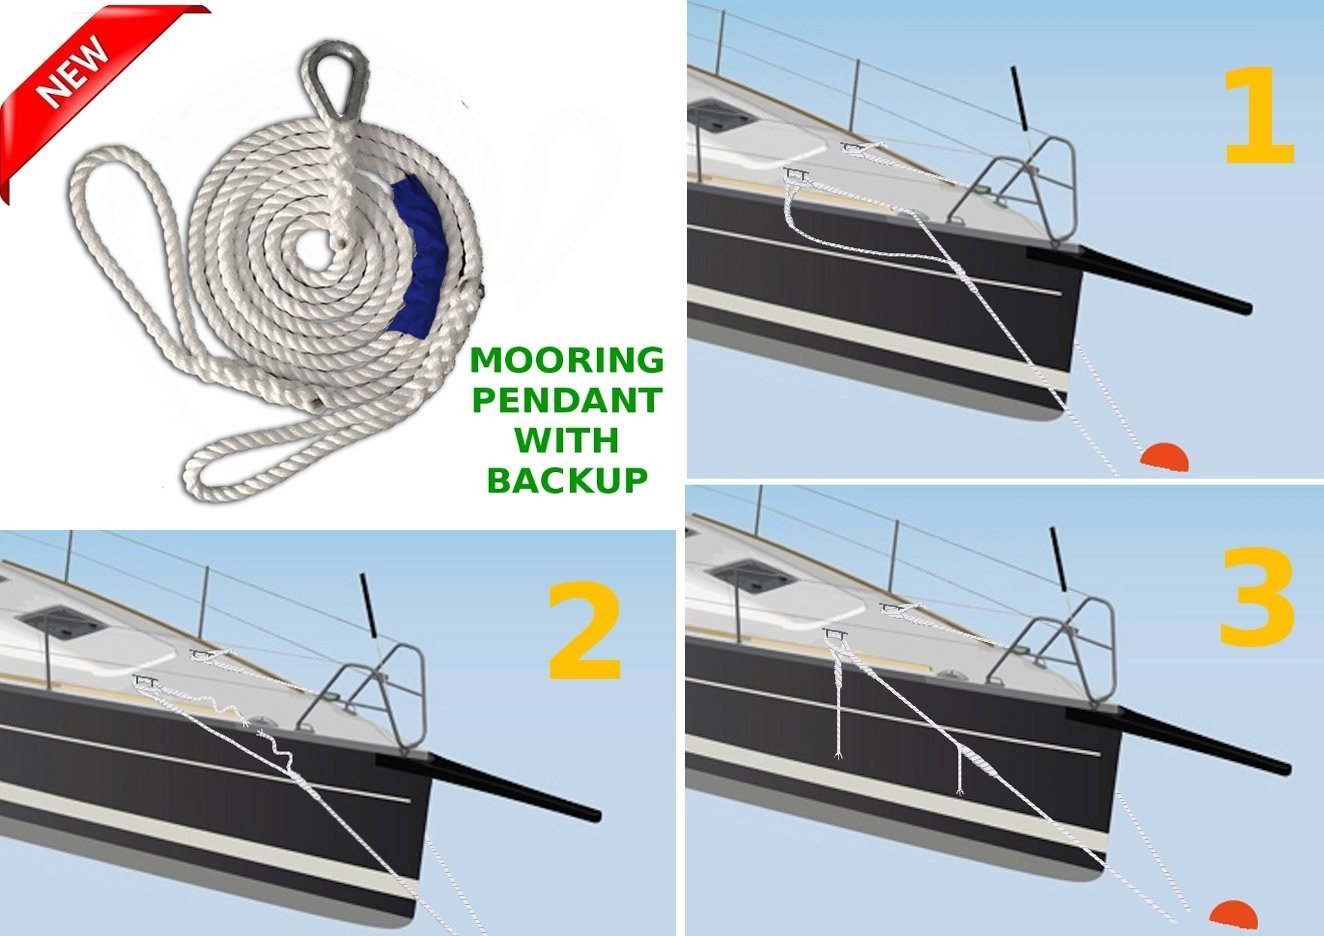 Mooring Pendant Premium 100% Nylon Rope 3/8 X 10'. Made in USA by dbRopes